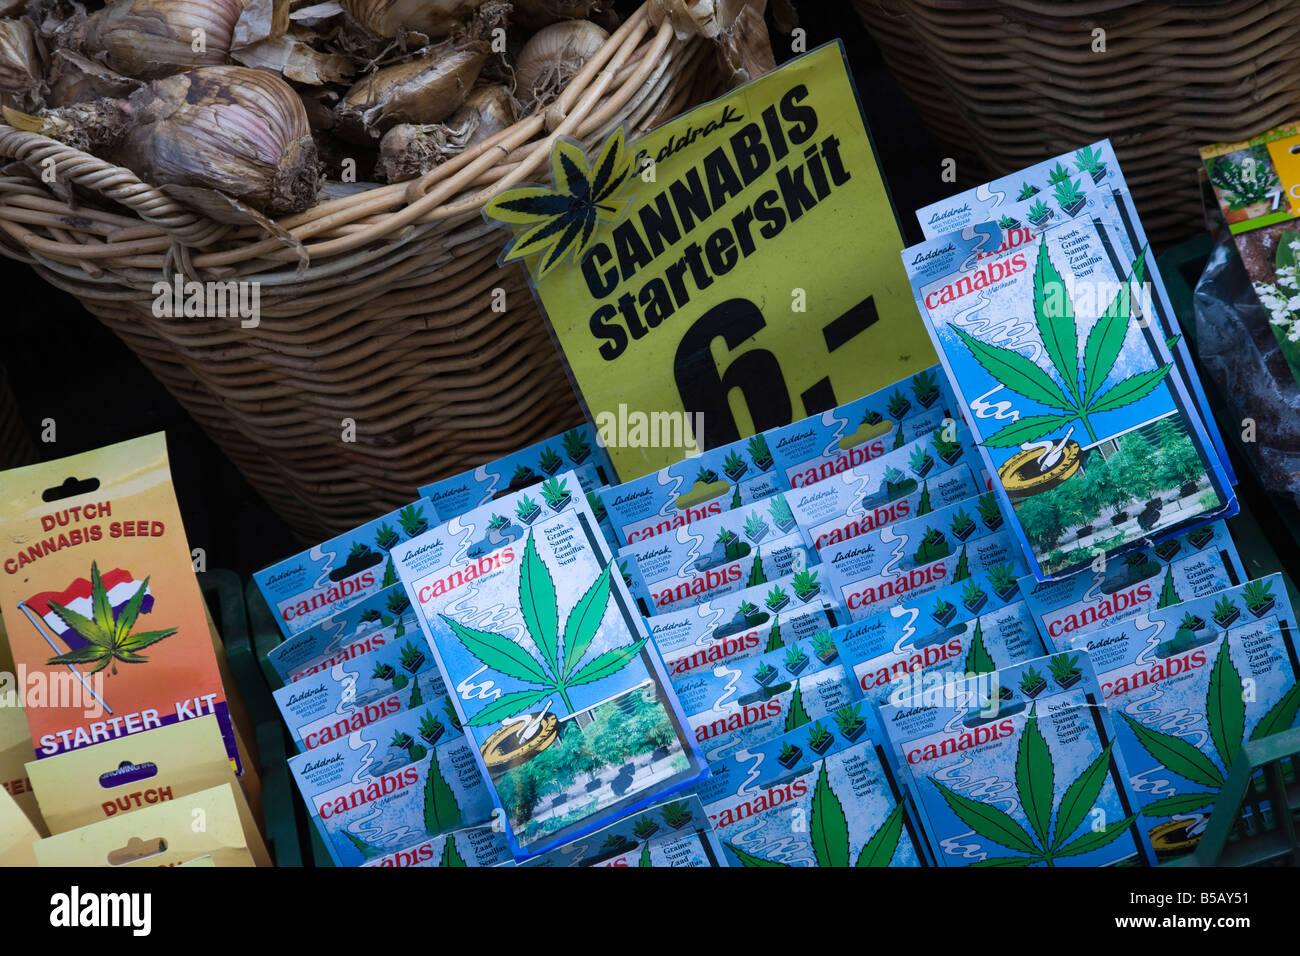 Cannabis seed packets for sale in the Bloemenmarkt (flower market), Amsterdam, Netherlands, Europe Stock Photo